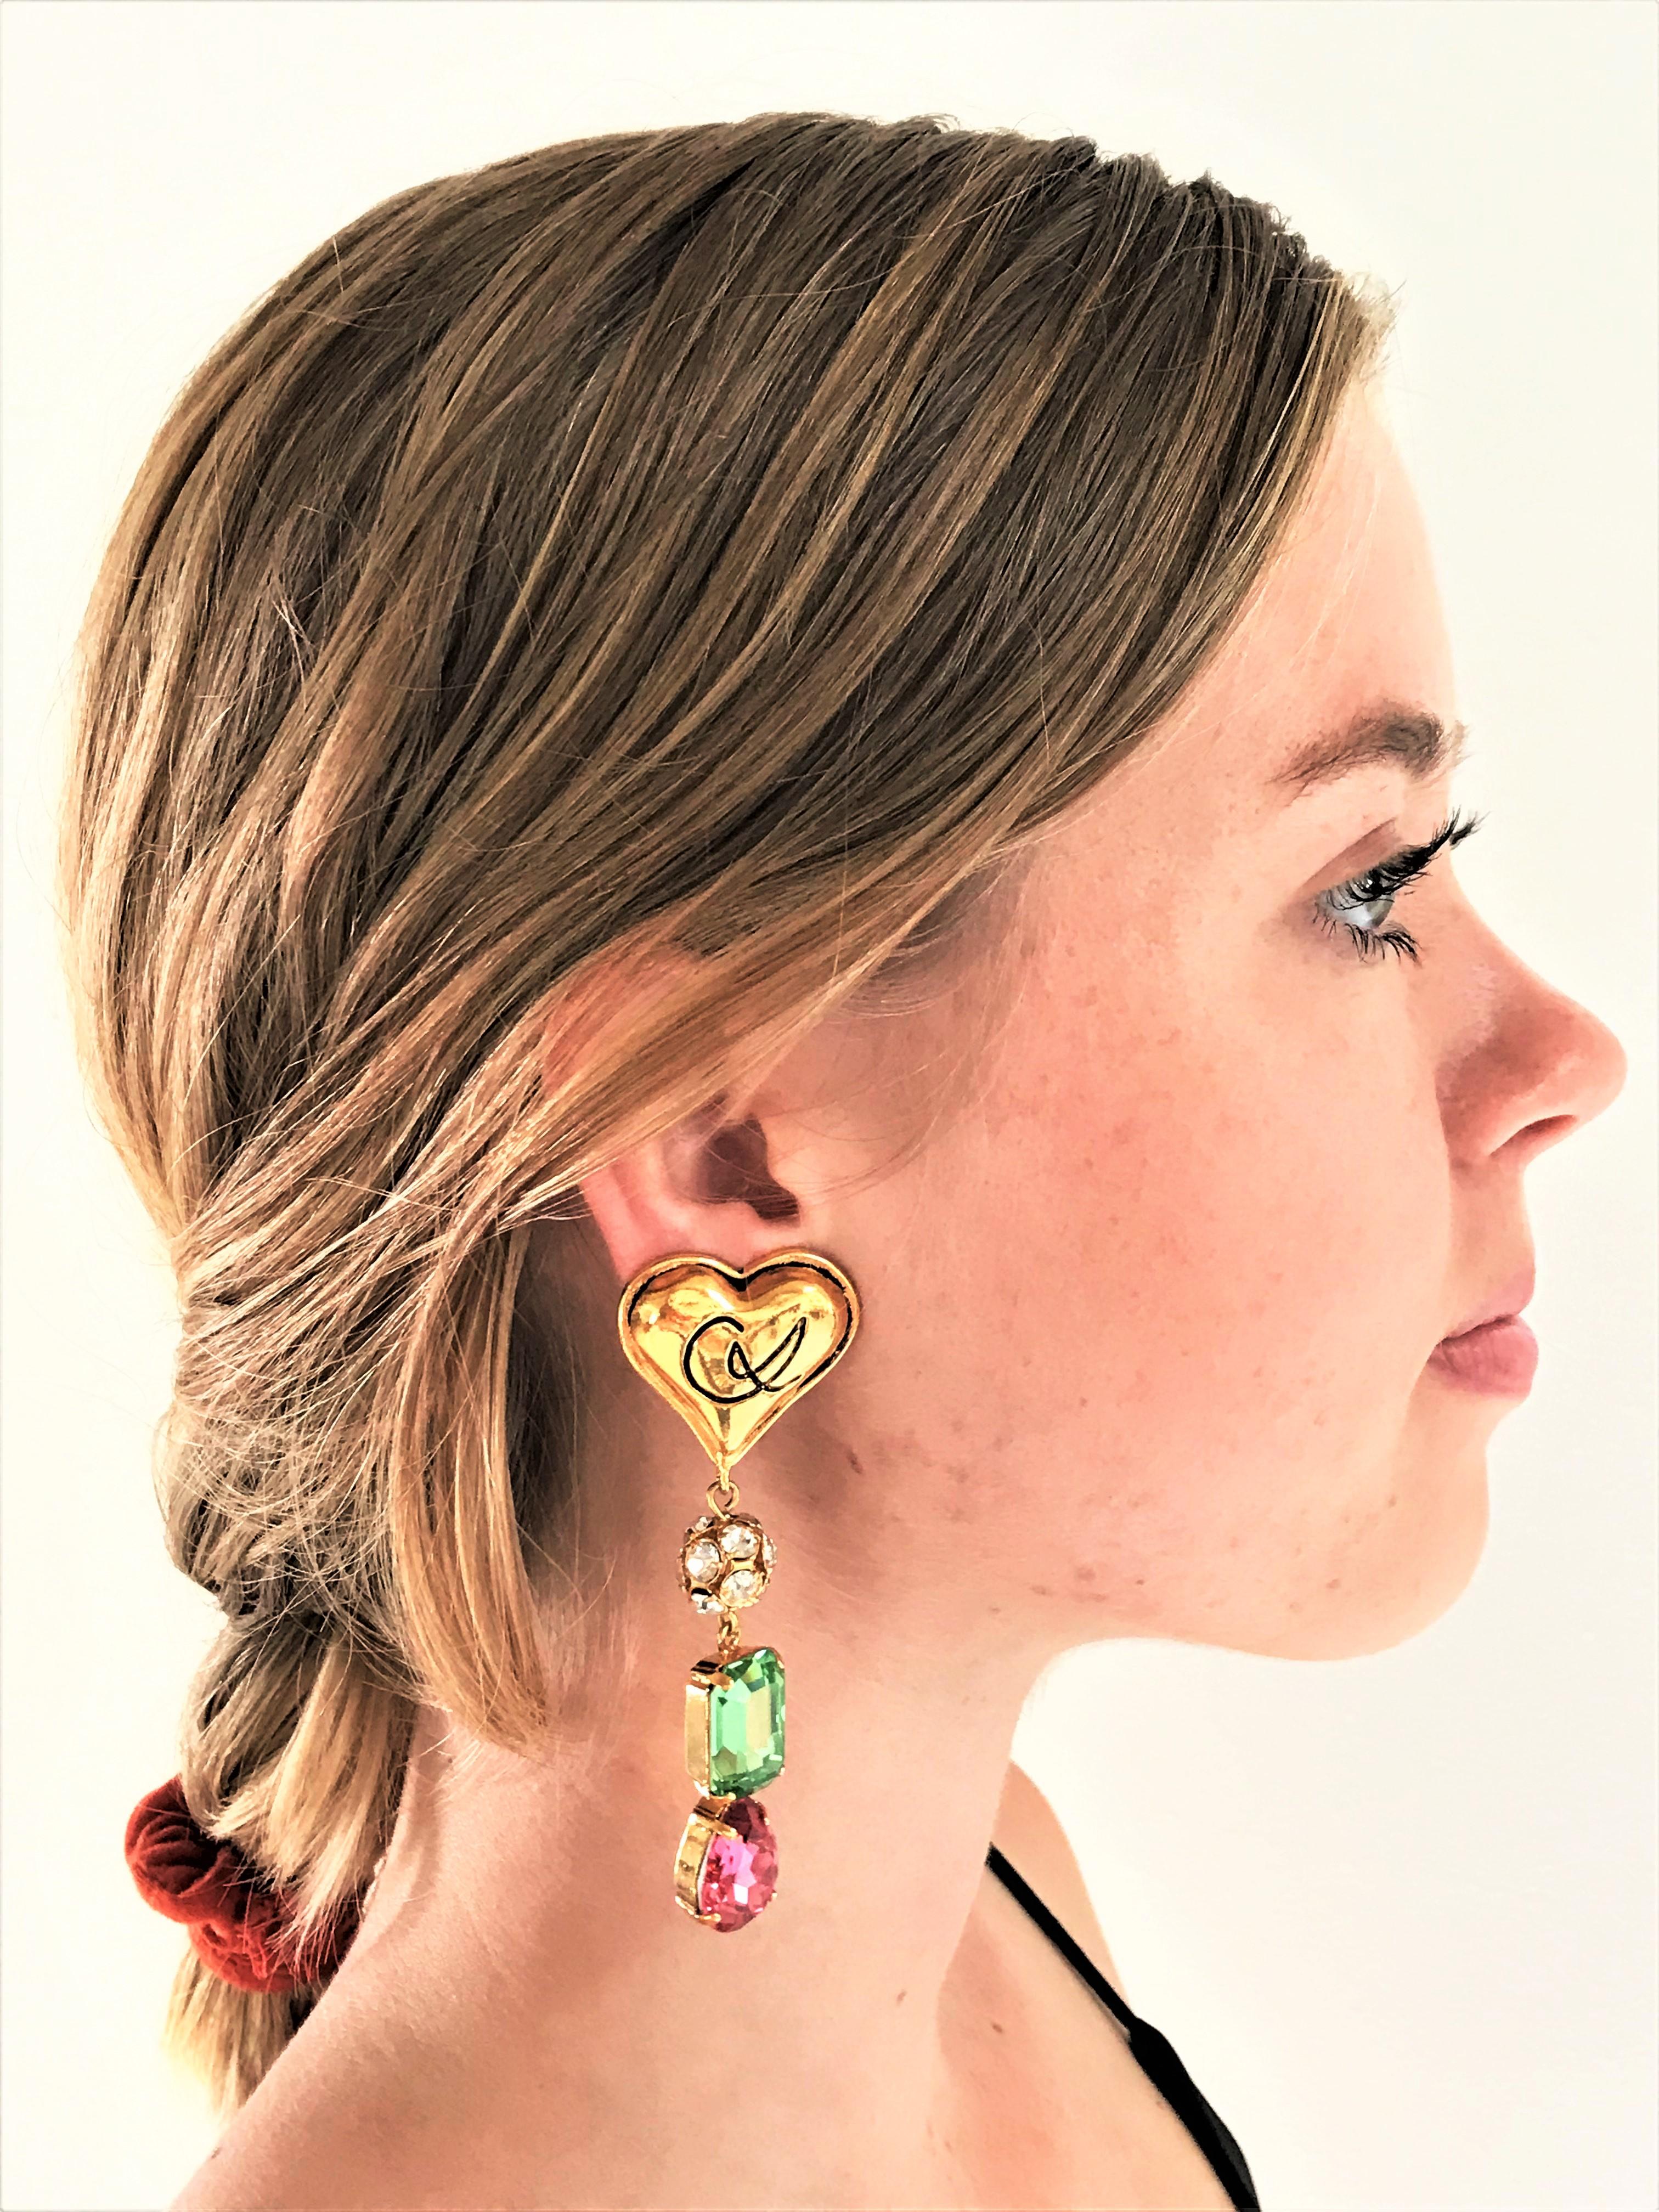 A pair of very decorative Lacroix ear clips. On top the famous Lacroix heart, hanging from it a ball studded with rhinestones, then a set and cut green rectangular rhinestone stone and a pink cut rhinestone drops.
Measurement: Full length